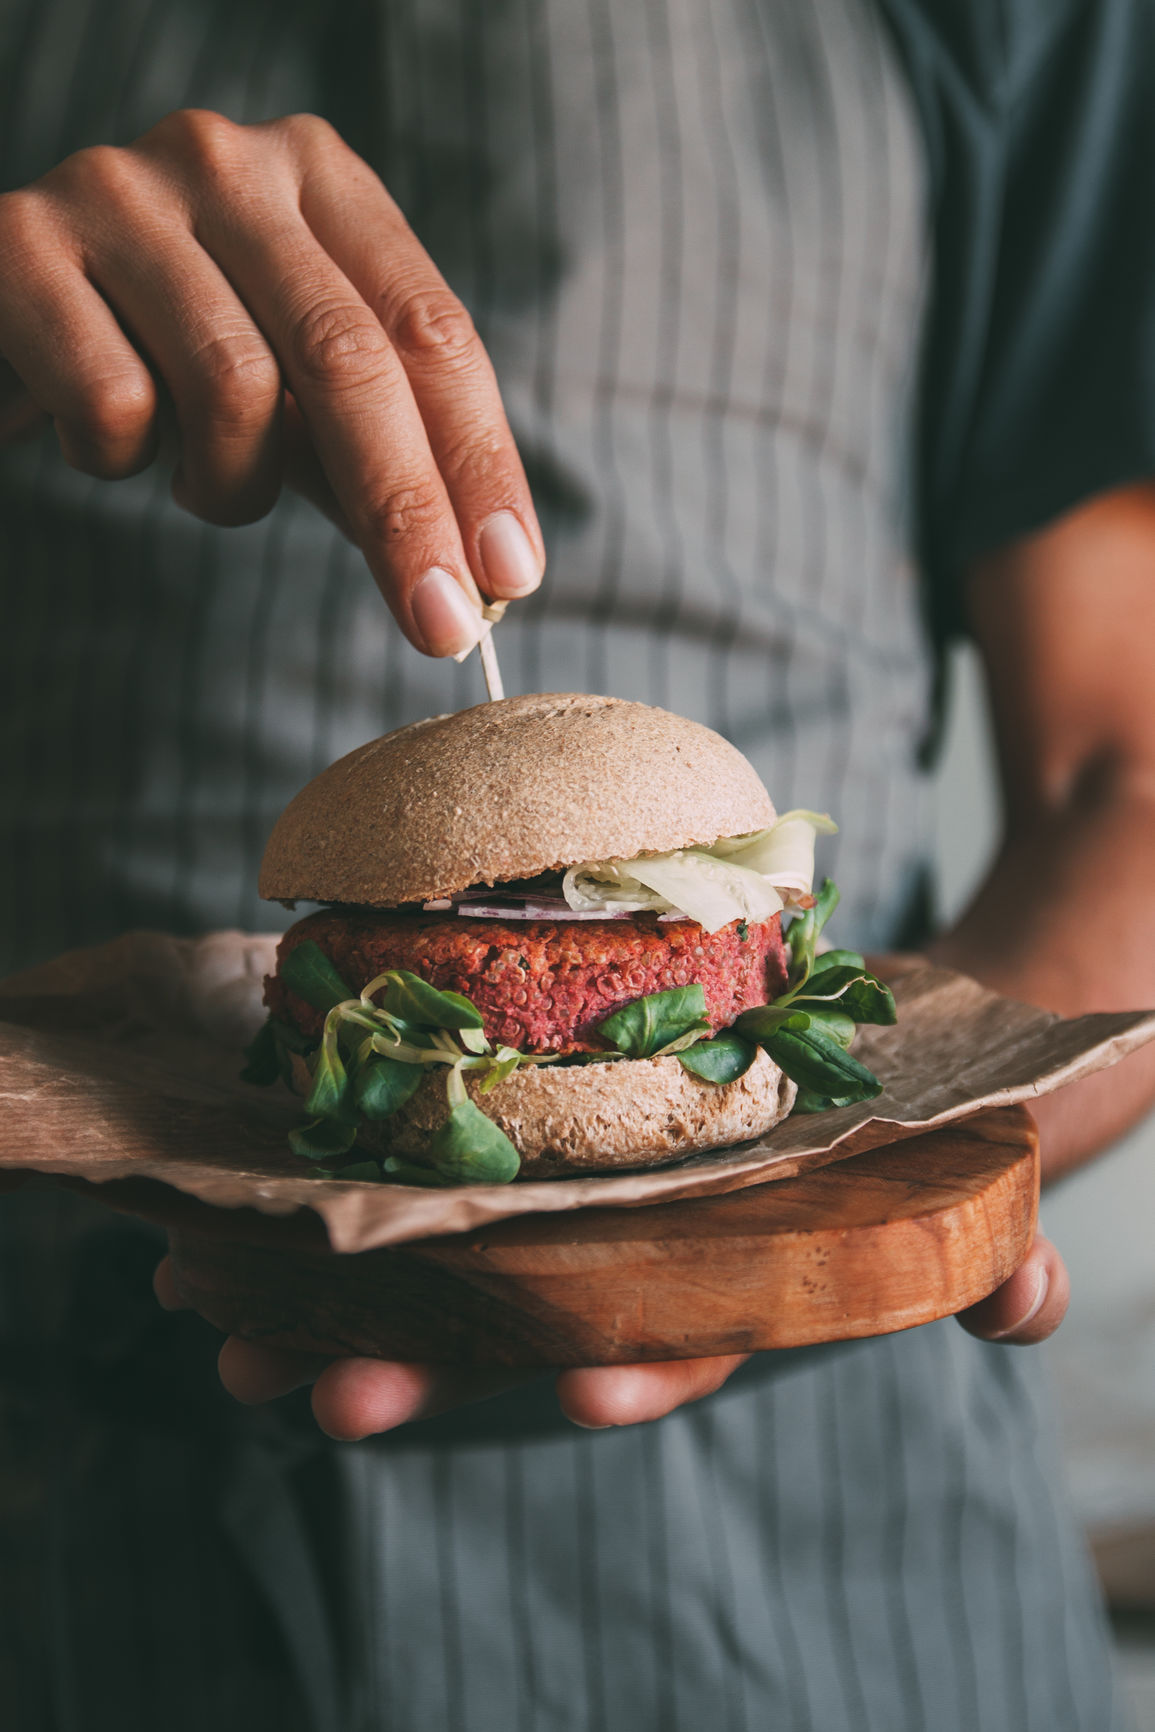 Vegan burger made with red beans, quinoa and beetroot